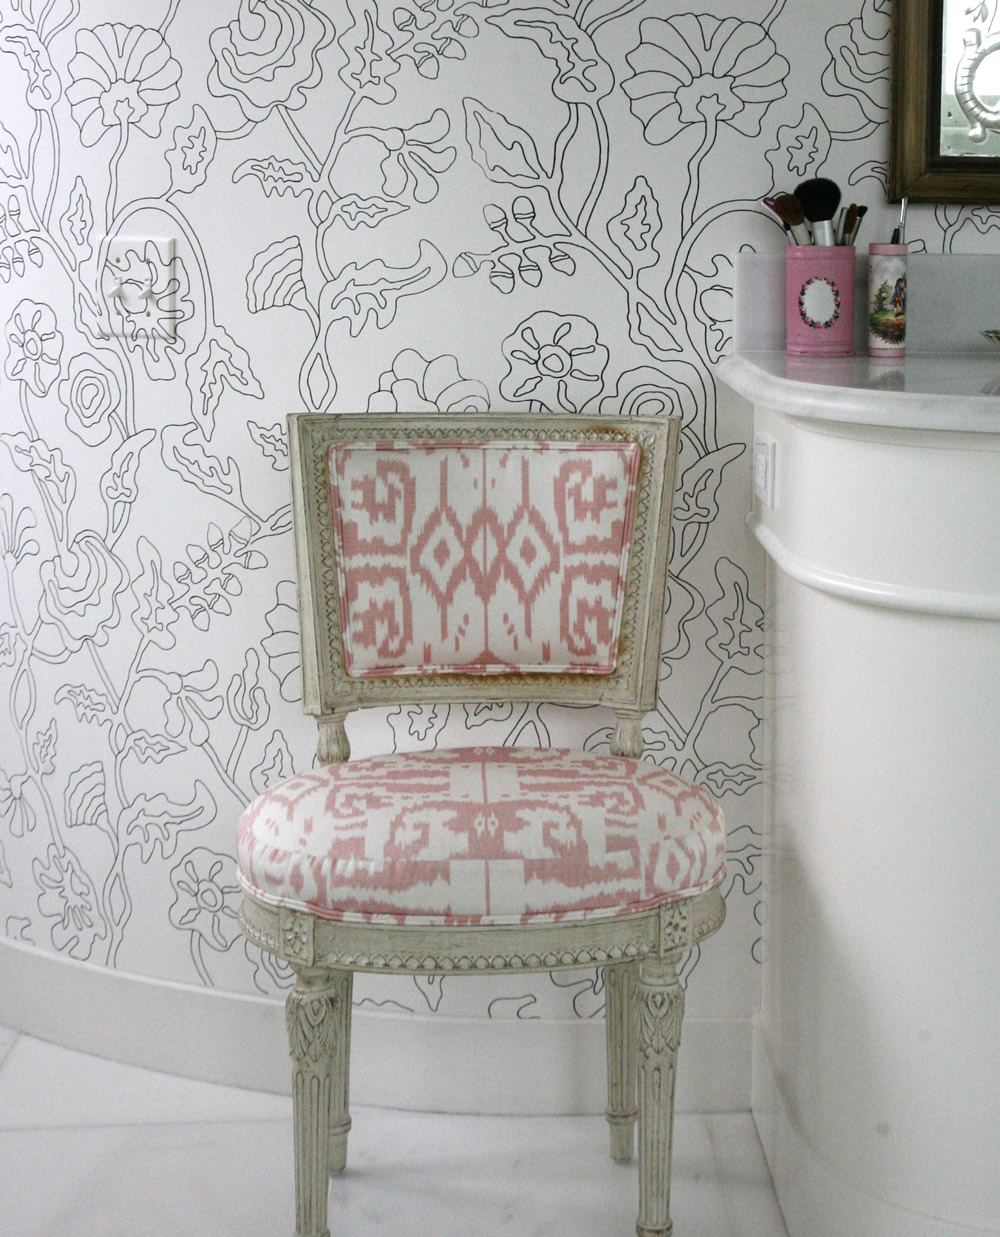 Alan Campbell Potalla Outline wallpaper with China Seas Island Ikat chair by Athalie Derse